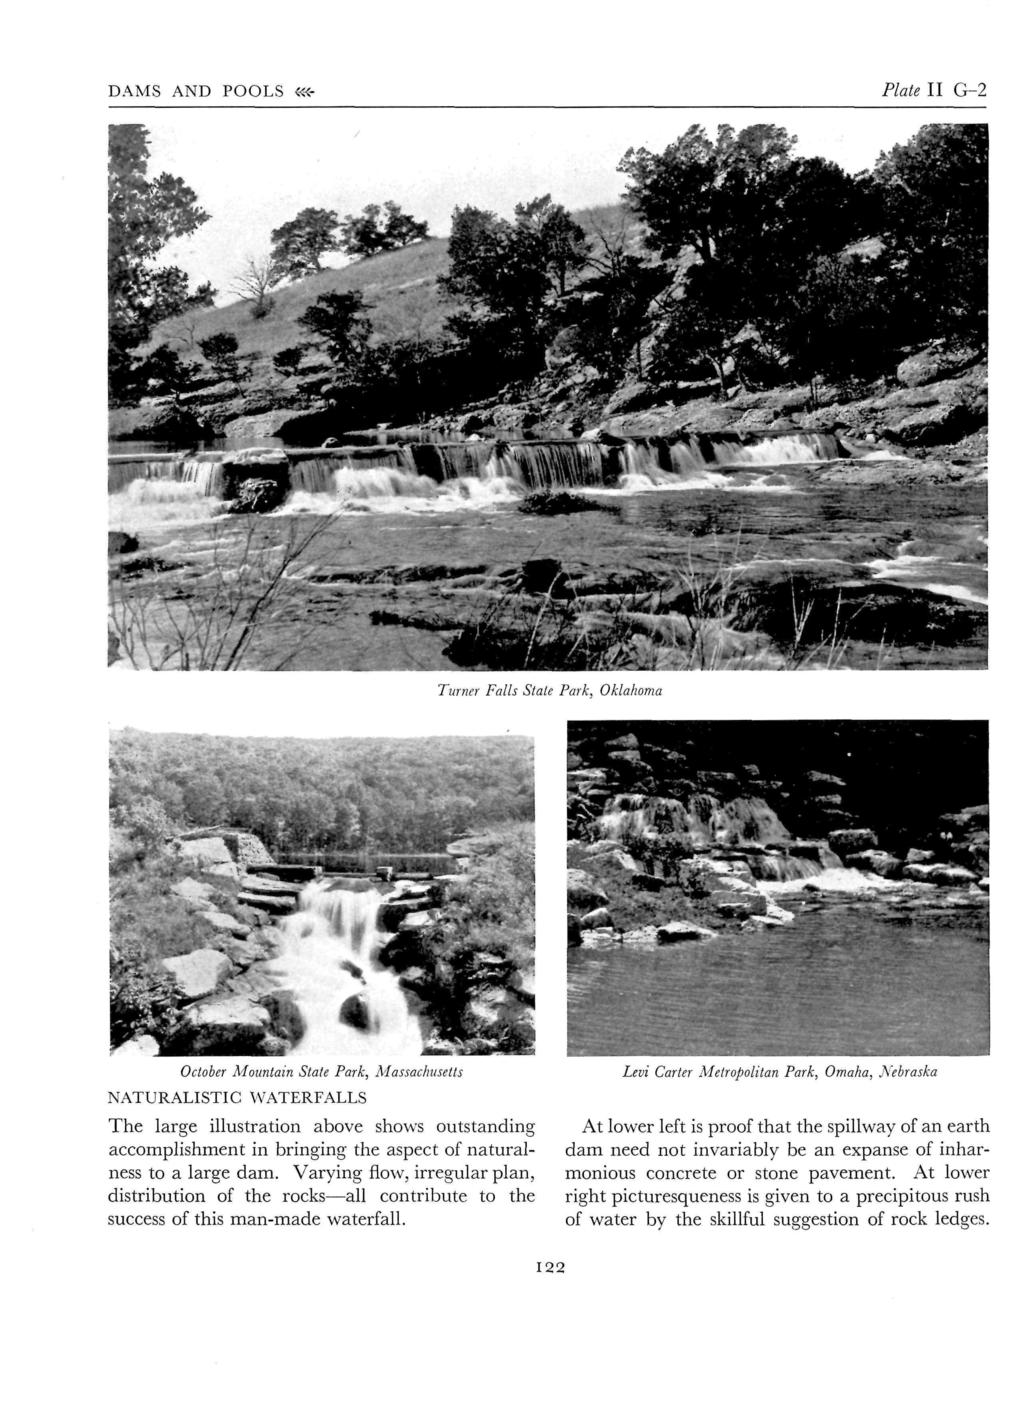 DAMS AND POOLS <«- Plate II G-2 Turner Falls Stale Park, Oklahoma October Mountain State Park, Adassachusetts NATURALISTIC WATERFALLS The large illustration above shows outstanding accomplishment in